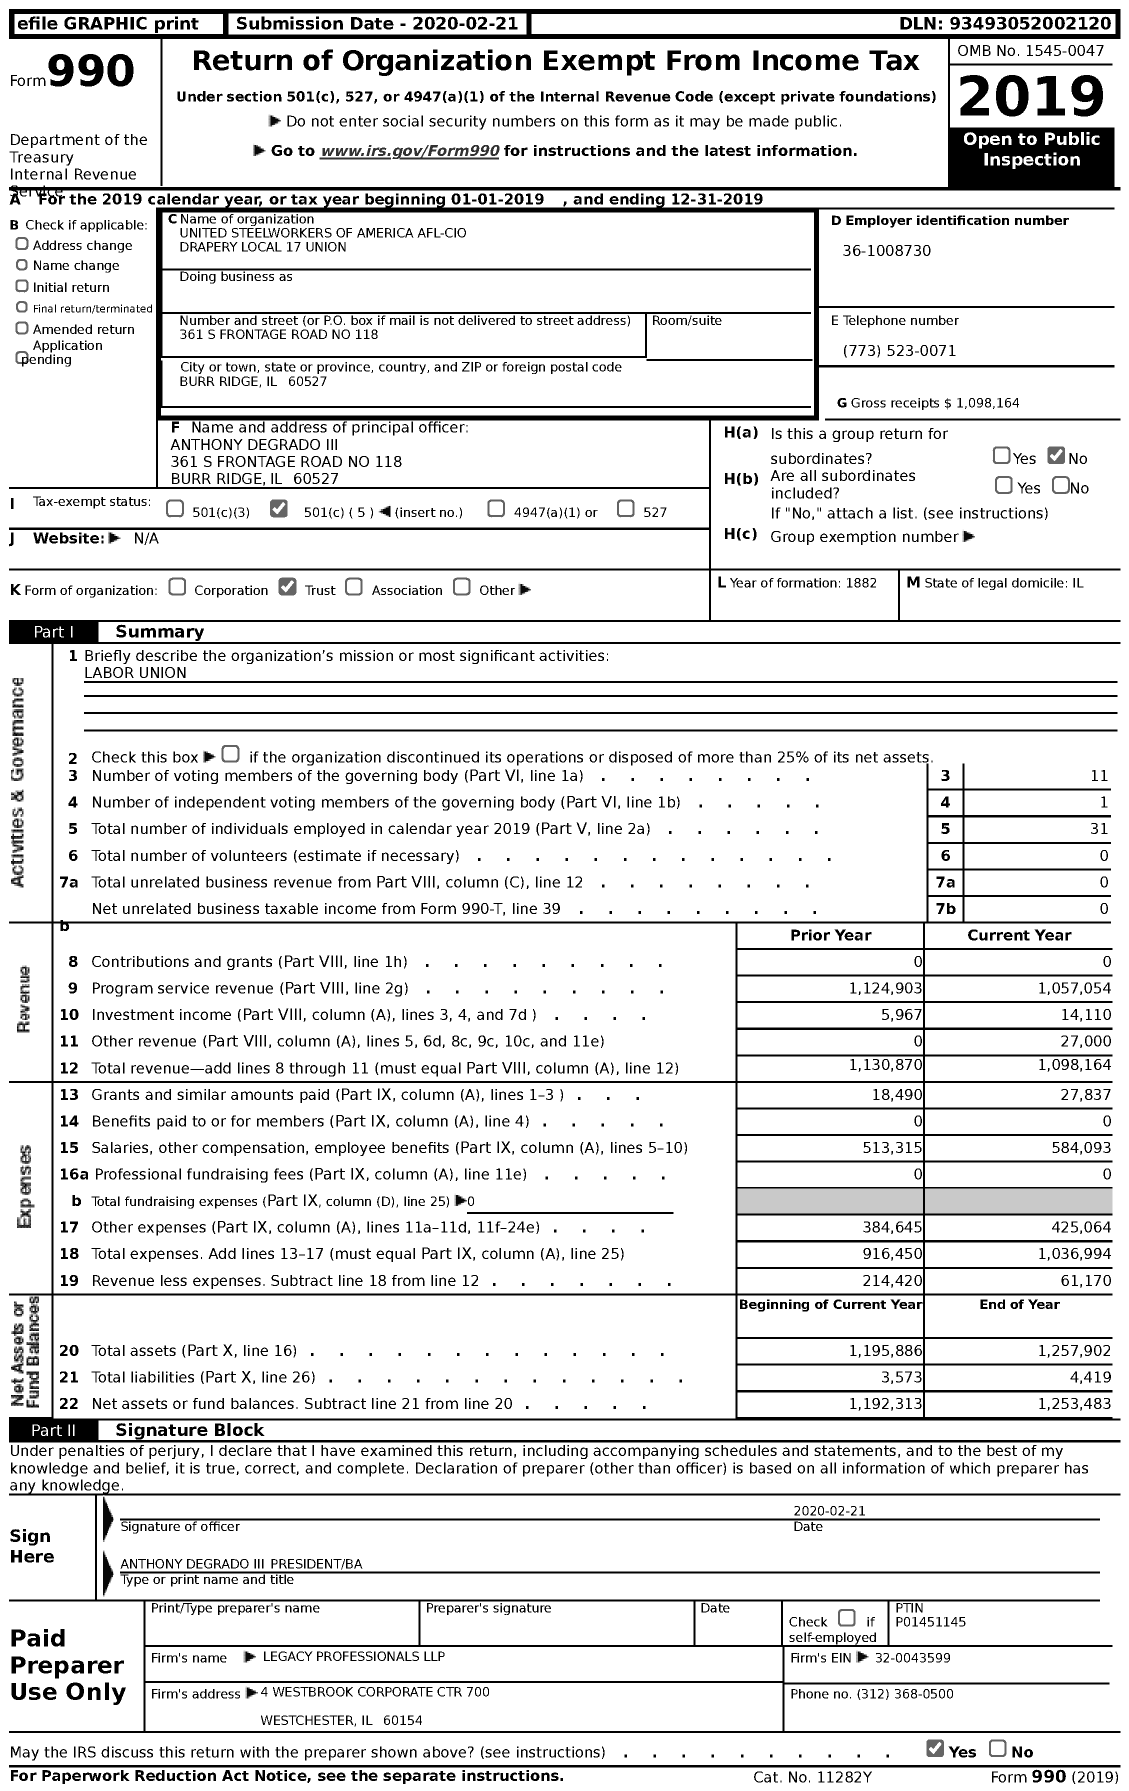 Image of first page of 2019 Form 990 for United Steelworkers of America AFL-CIO Drapery Local 17 Union